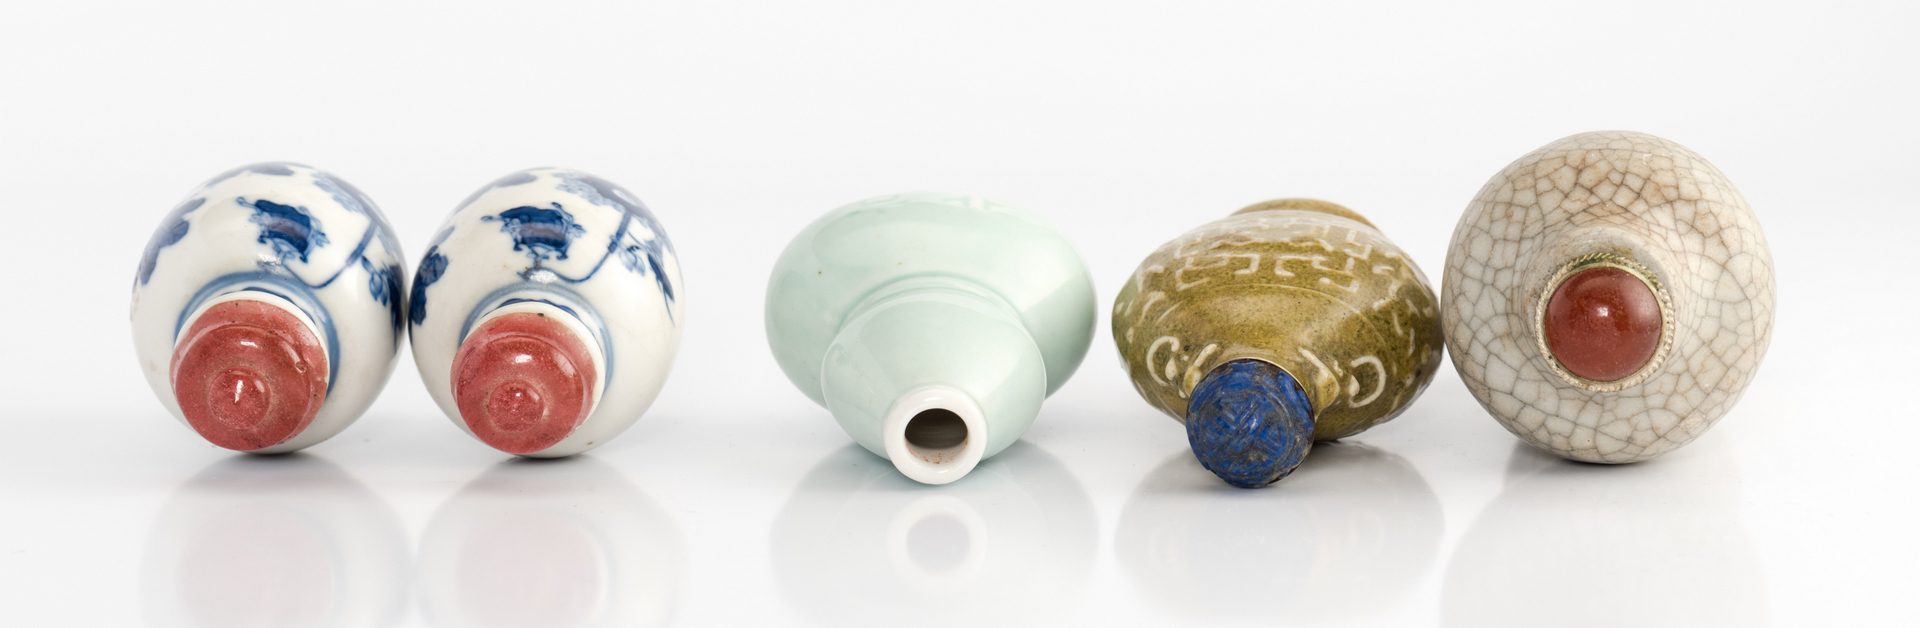 Lot 9: Collection of 5 Ceramic Snuff Bottles